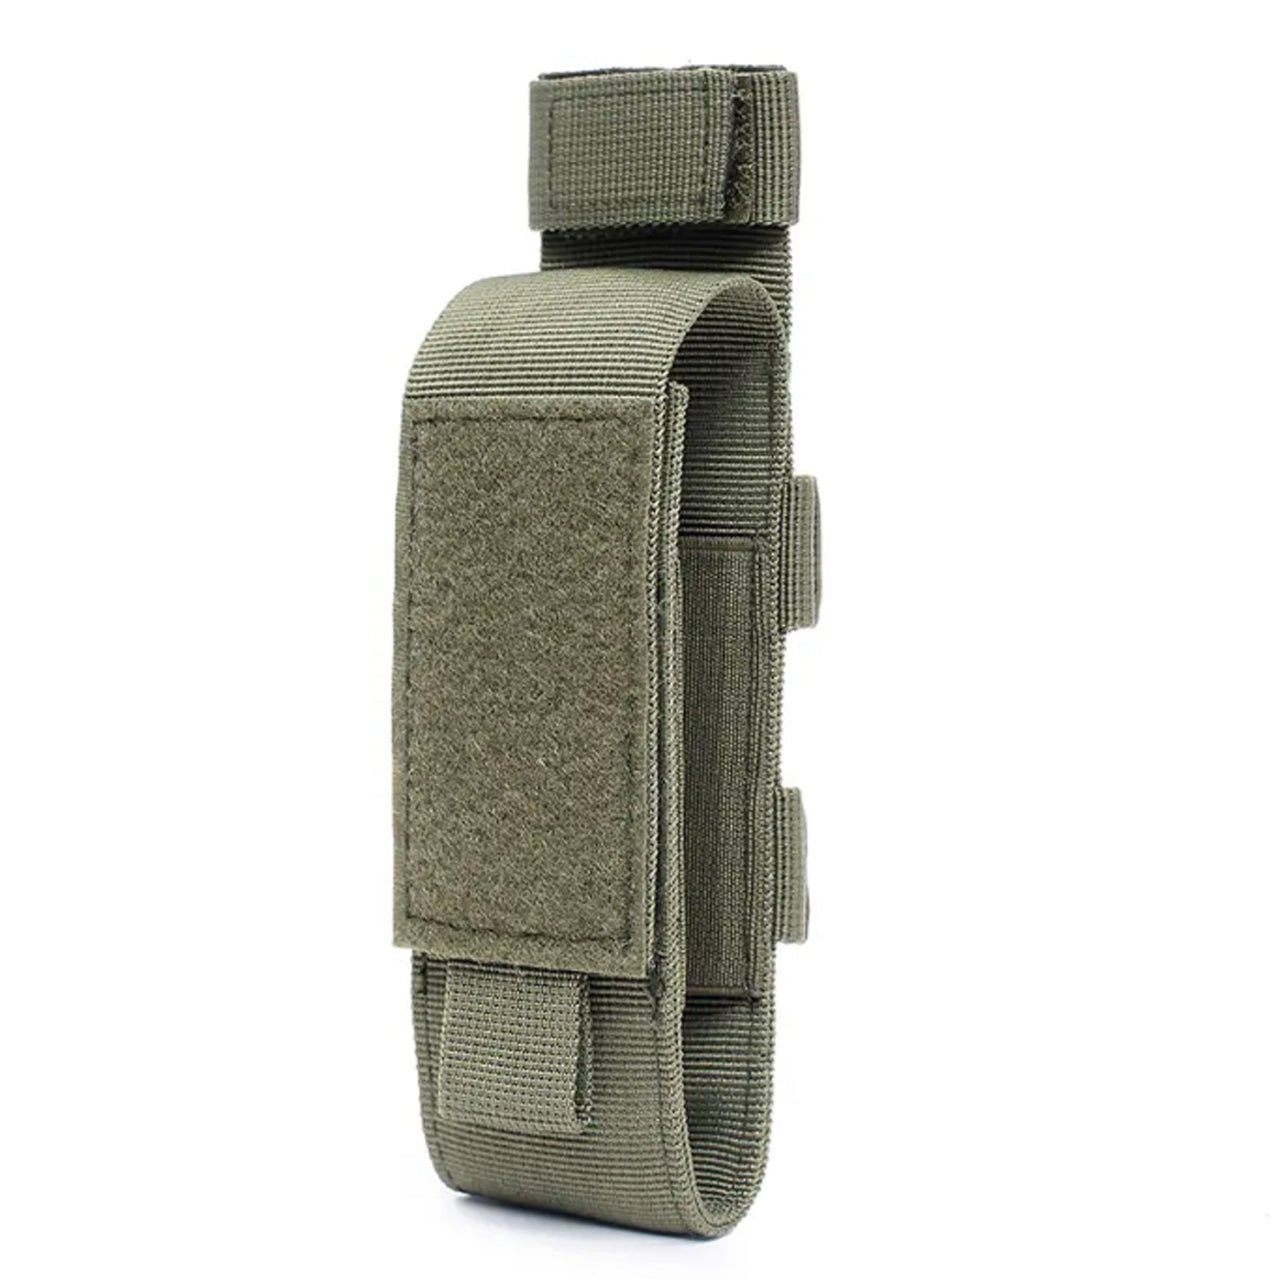 Secure your CAT7-Tourniquet and shears with this MOLLE system pouch! A hook-and-loop fastener ensures that you’ll have rapid access to your essential medical supplies in the heat of the moment. www.defenceqstore.com.au